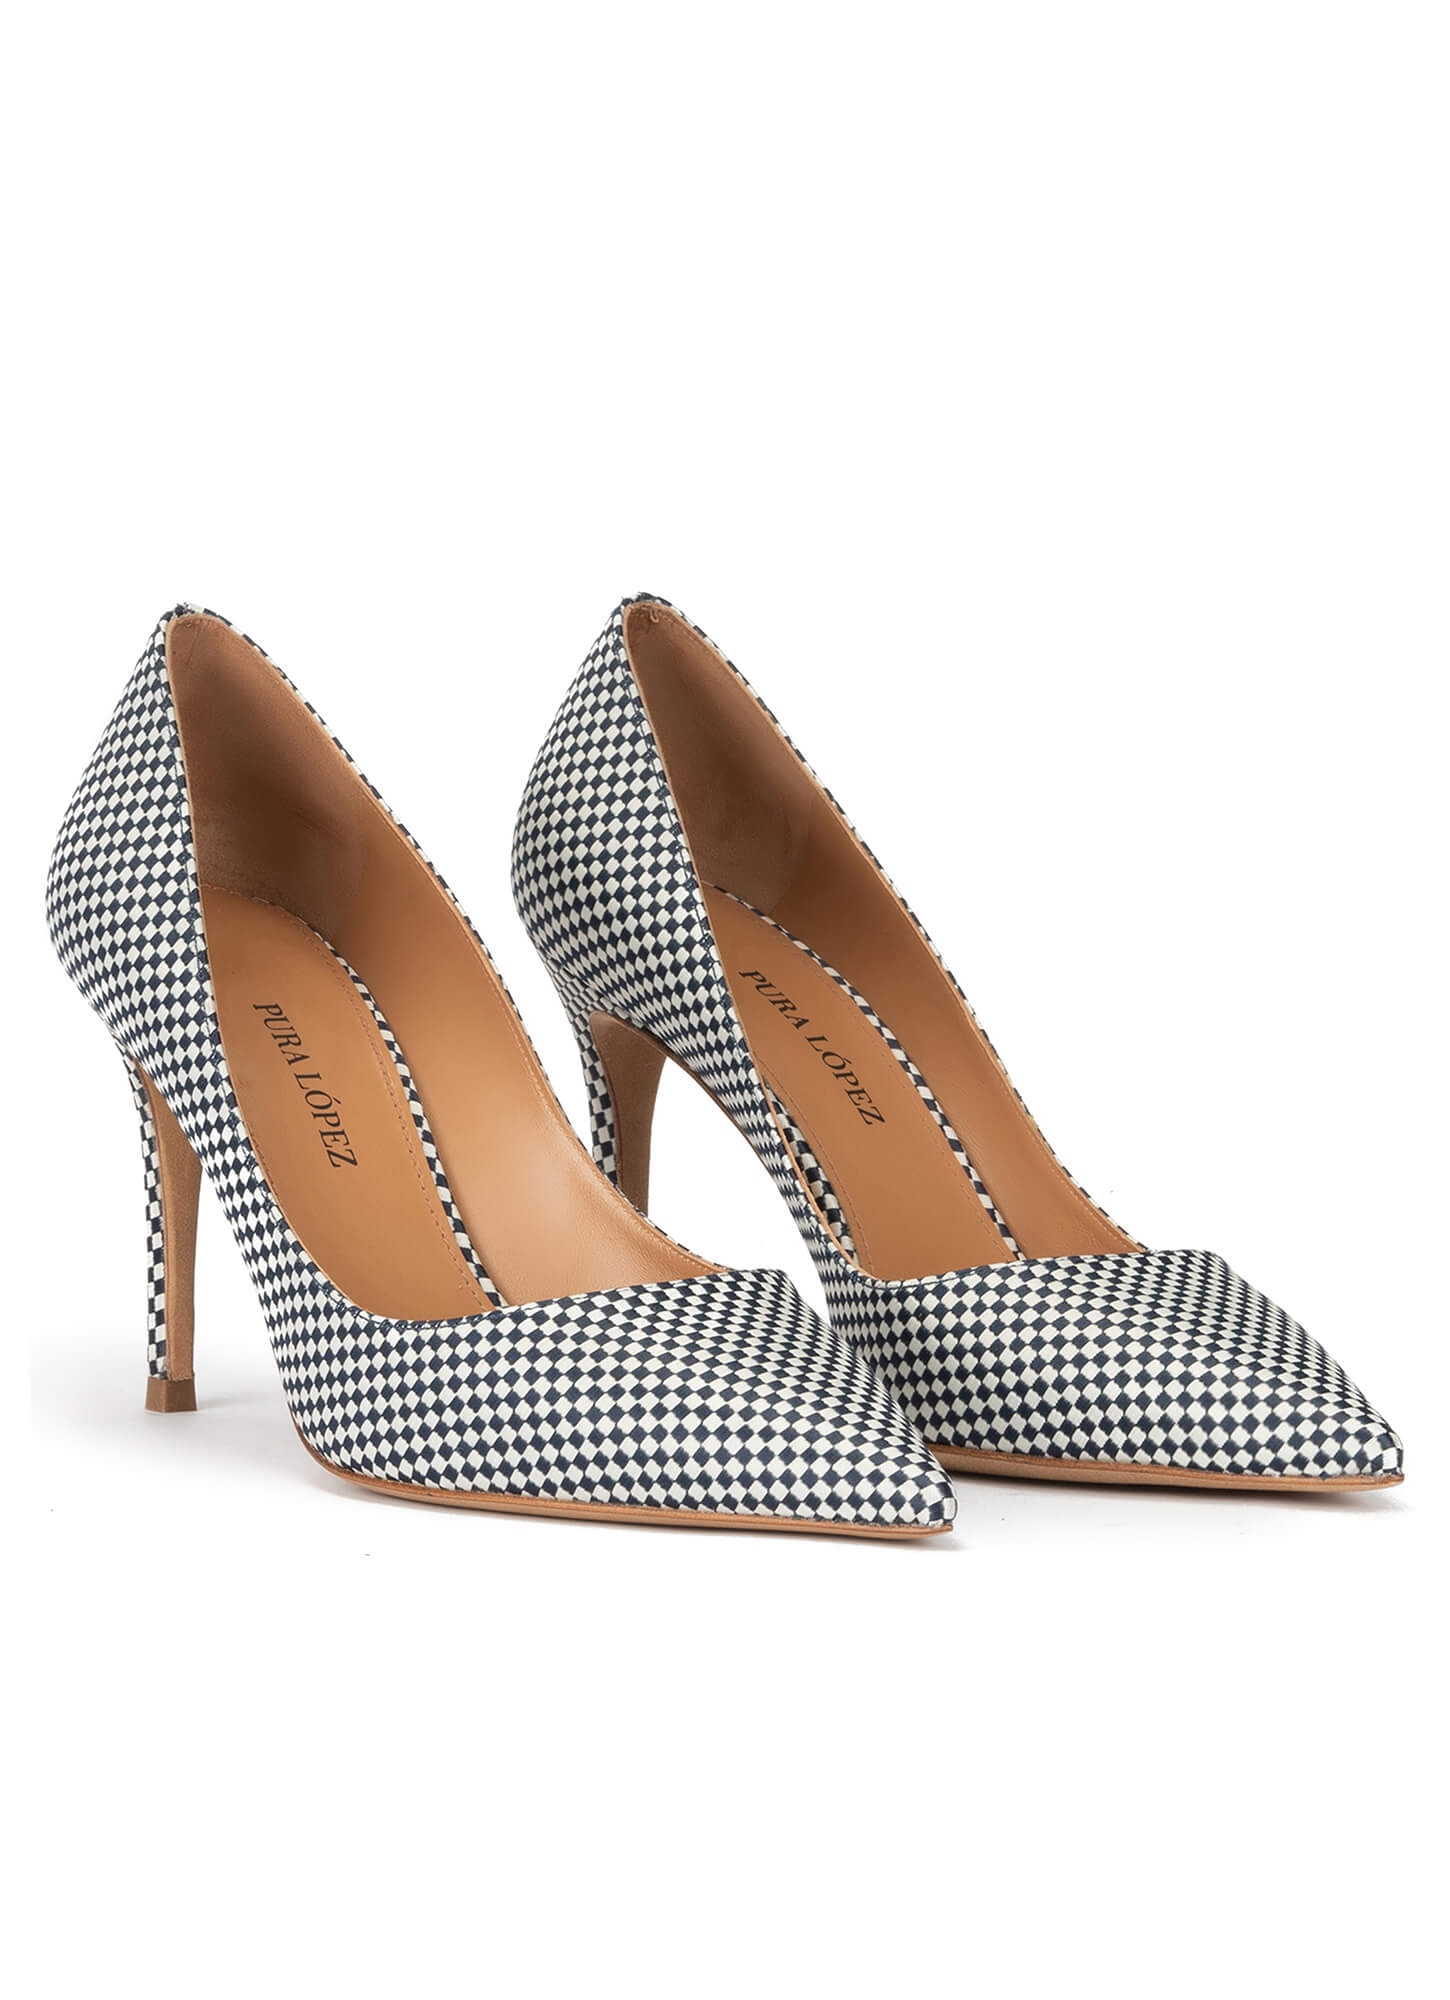 Cataract Susteen Anvendelse Point-toe high heel pumps in white-blue checked fabric . PURA LOPEZ